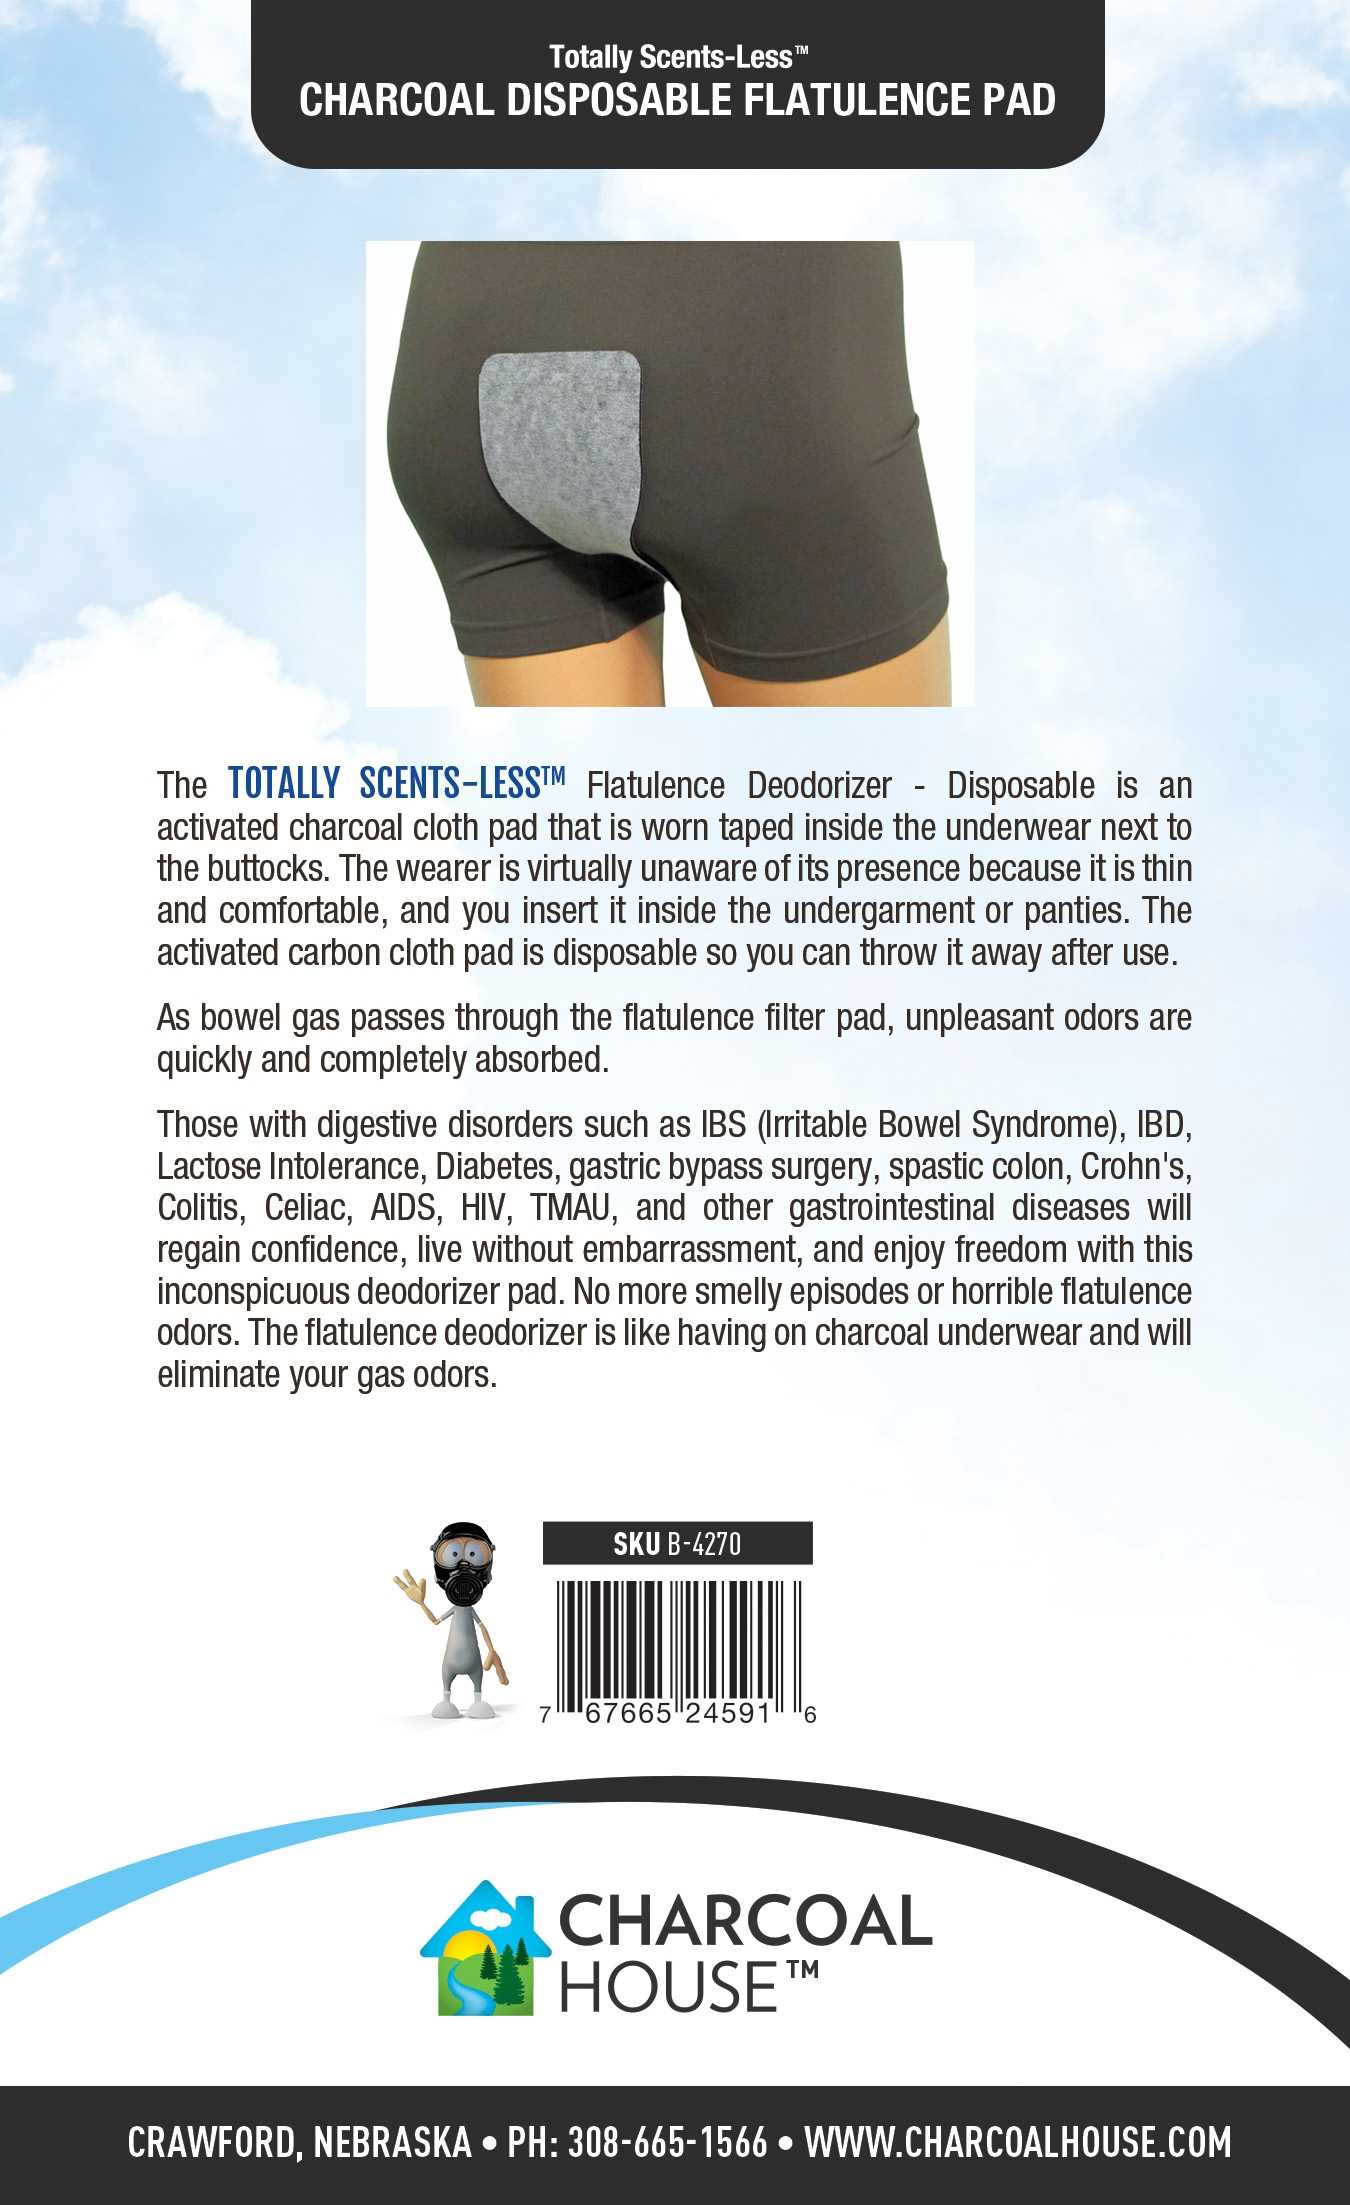 Totally Scents-Less Charcoal Flatulence Deodorizer (Disposable)